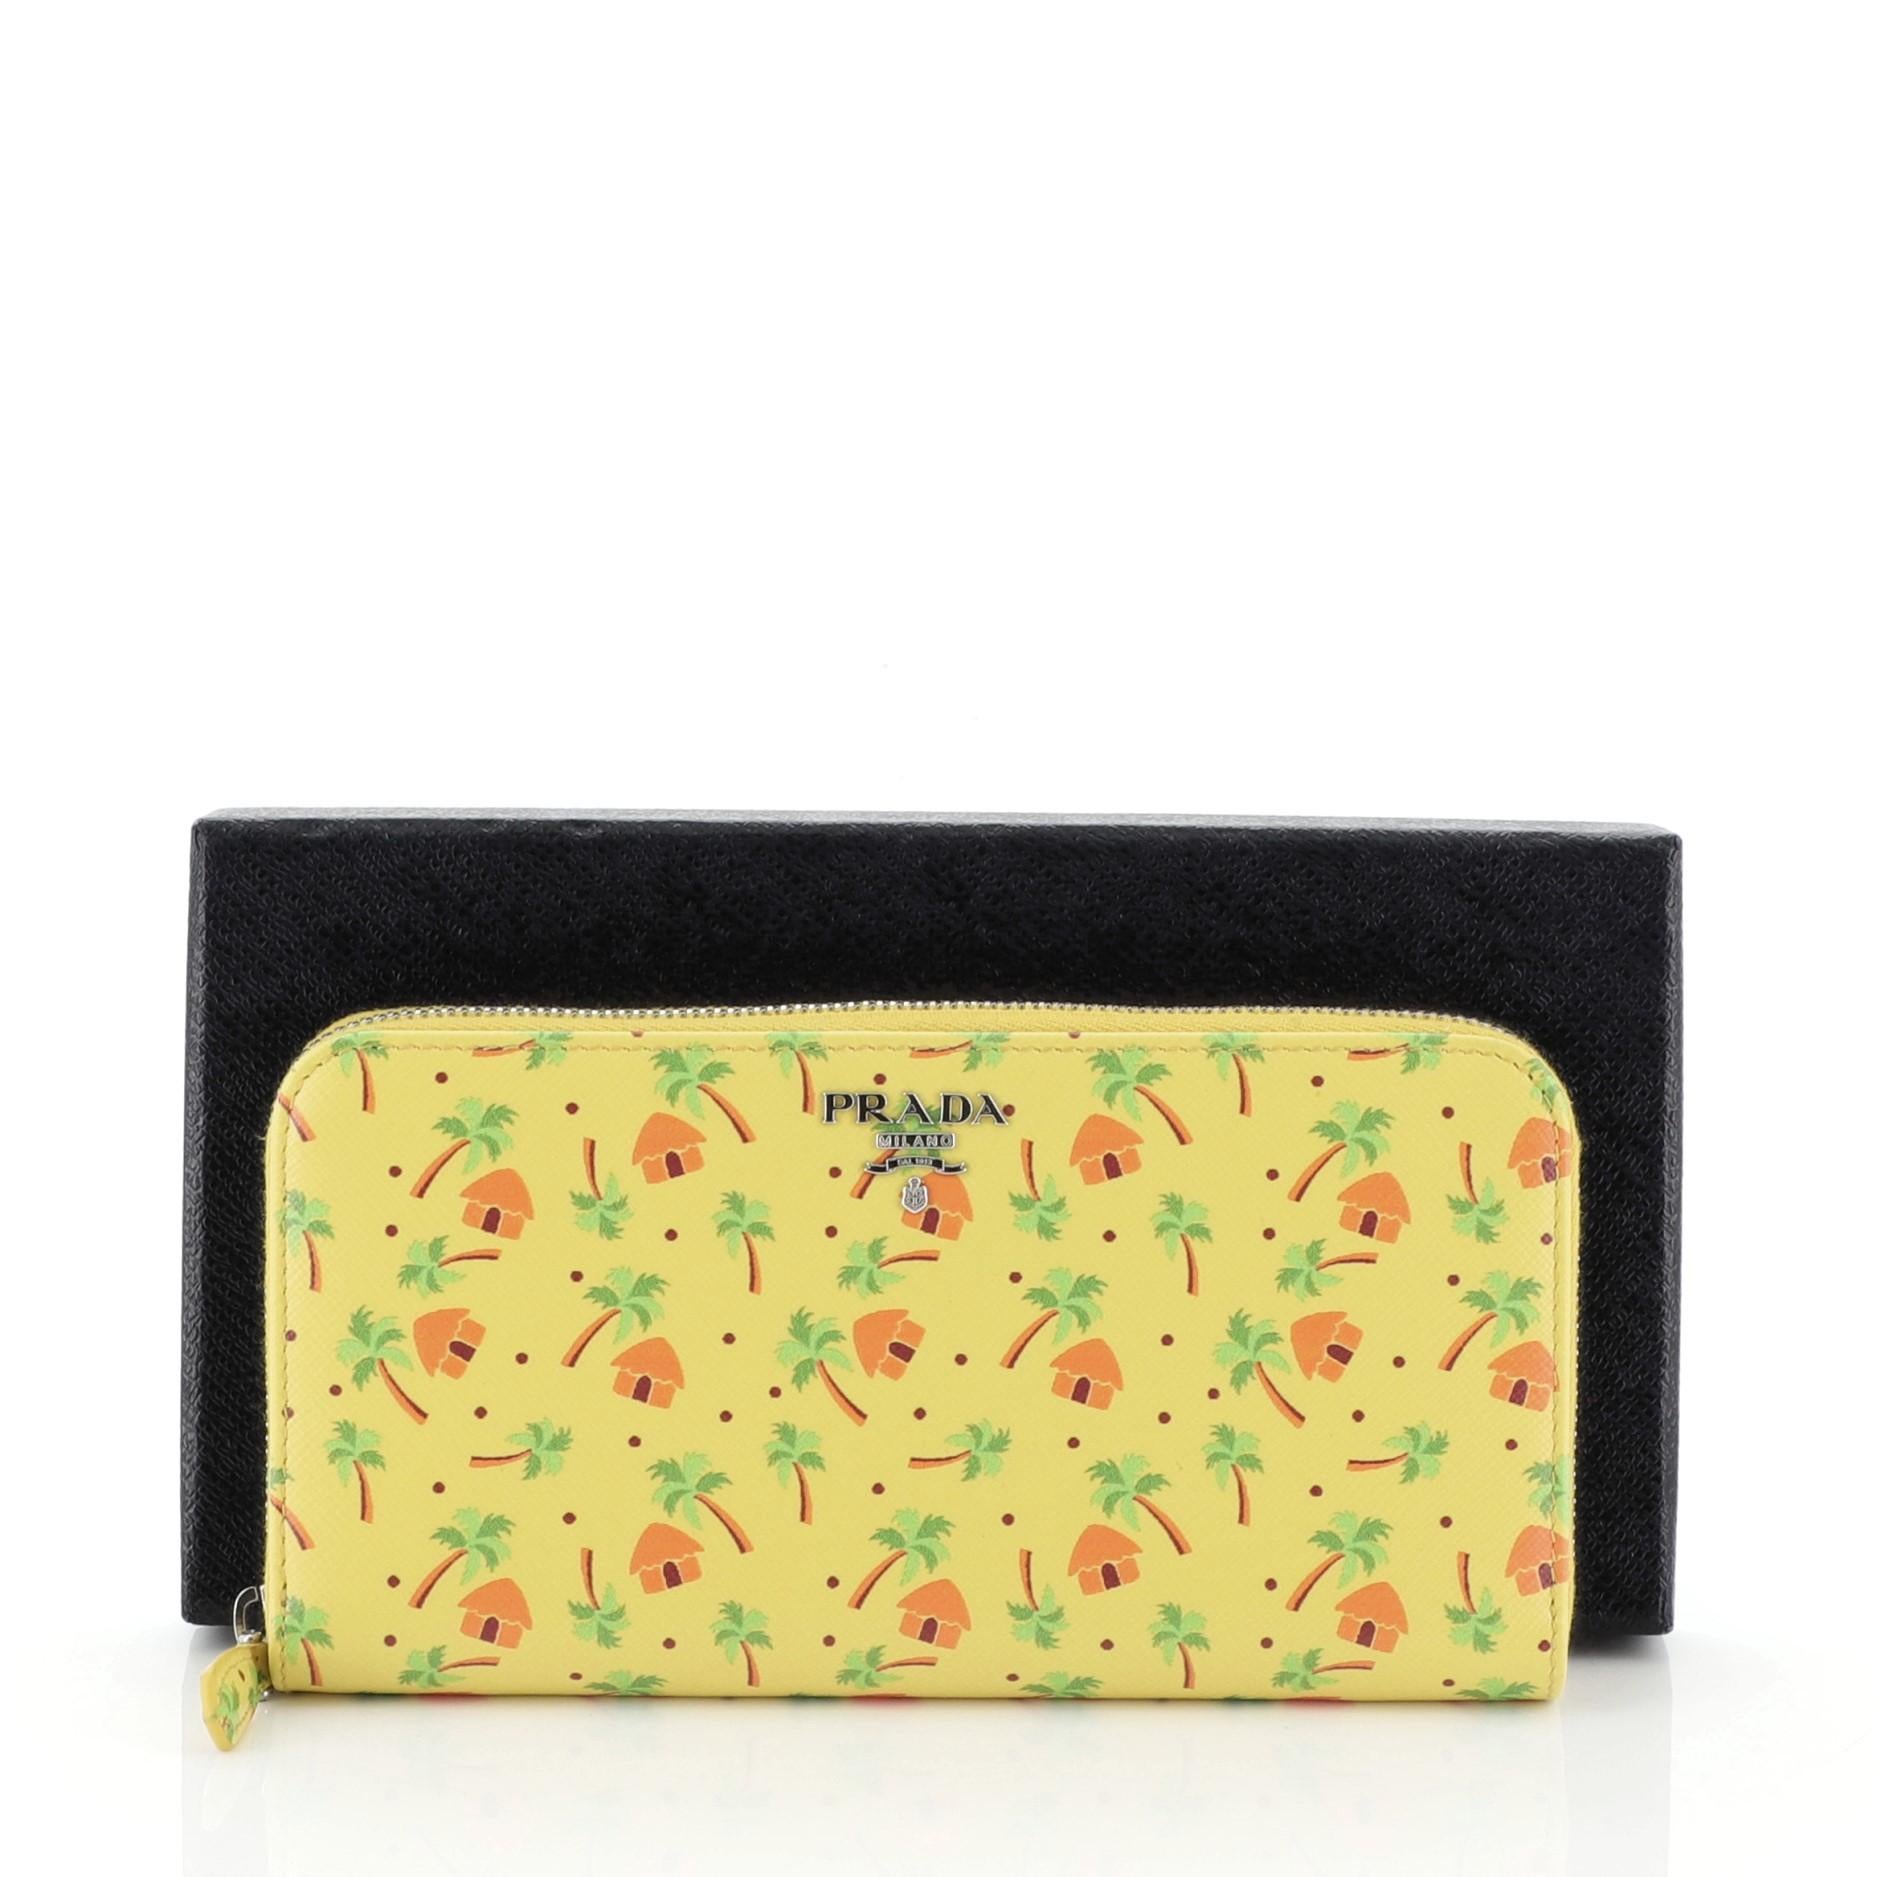 This Prada Zip Around Wallet Printed Saffiano Long, crafted from yellow printed saffiano leather, features silver-tone hardware. Its zip closure opens to a yellow leather interior with multiple card slots and zip pocket. 

Estimated Retail Price: